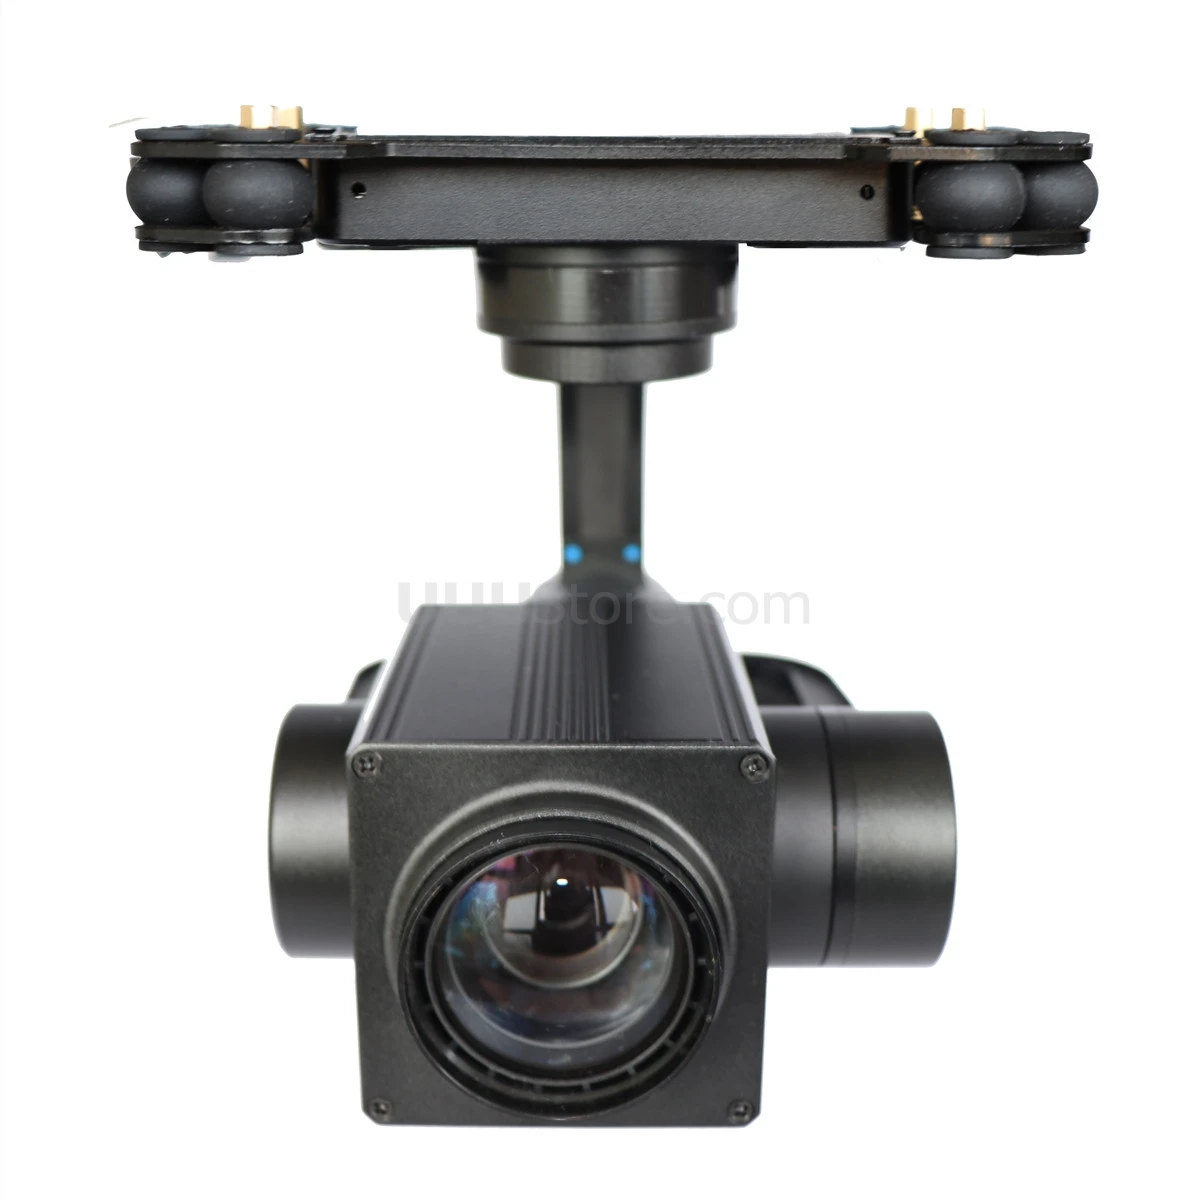 5-30KM 30x Optical Zoom UAV Drone Infrared Camera & 3-Axis Stabilizer And Automatic Tracking 2